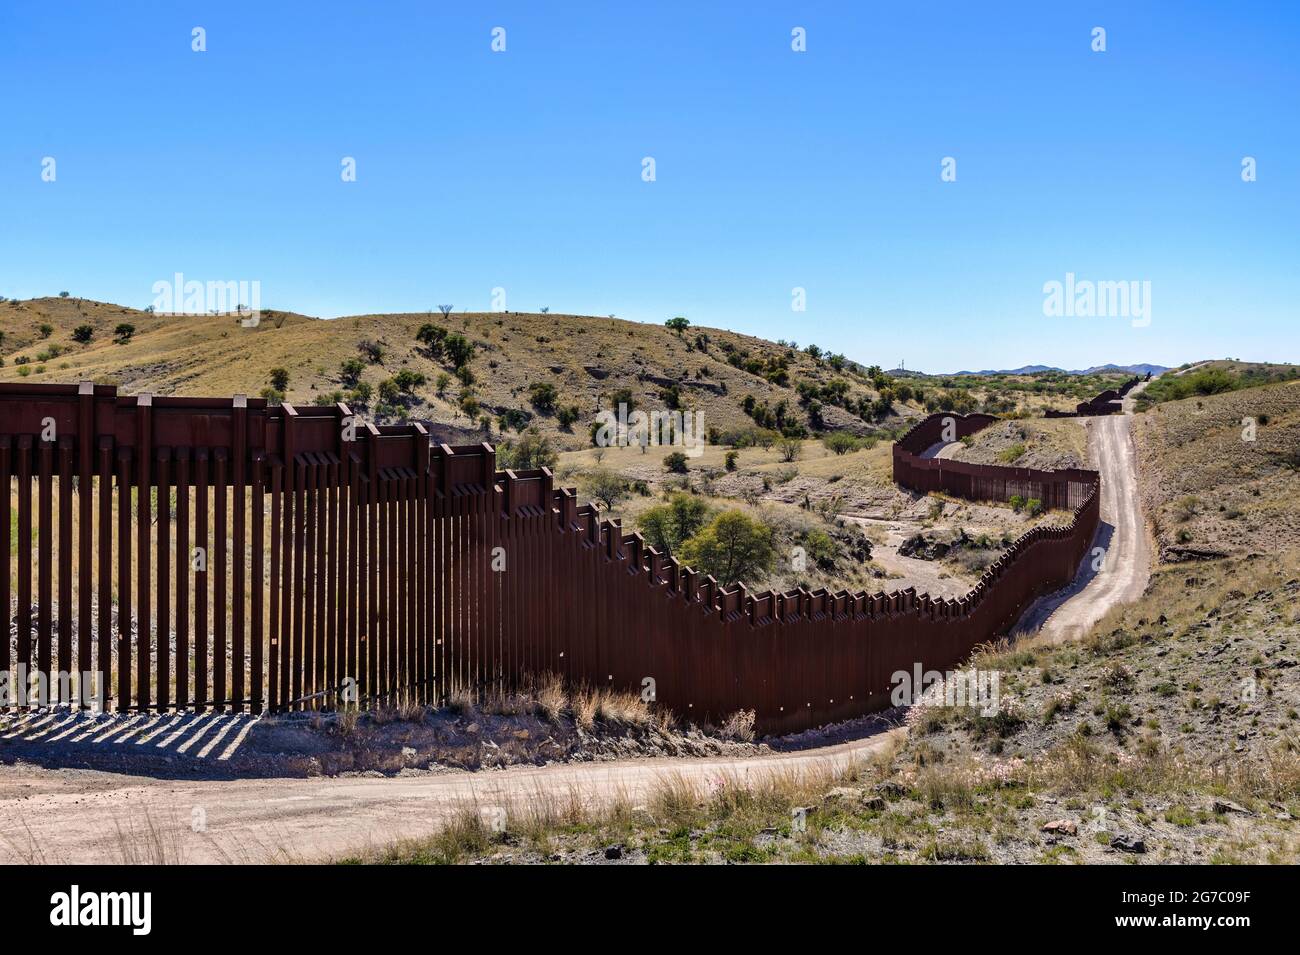 US border fence on the Mexico border, east of Nogales Arizona USA, and Nogales Sonora Mexico, viewed from US side. This view shows fence route being a Stock Photo